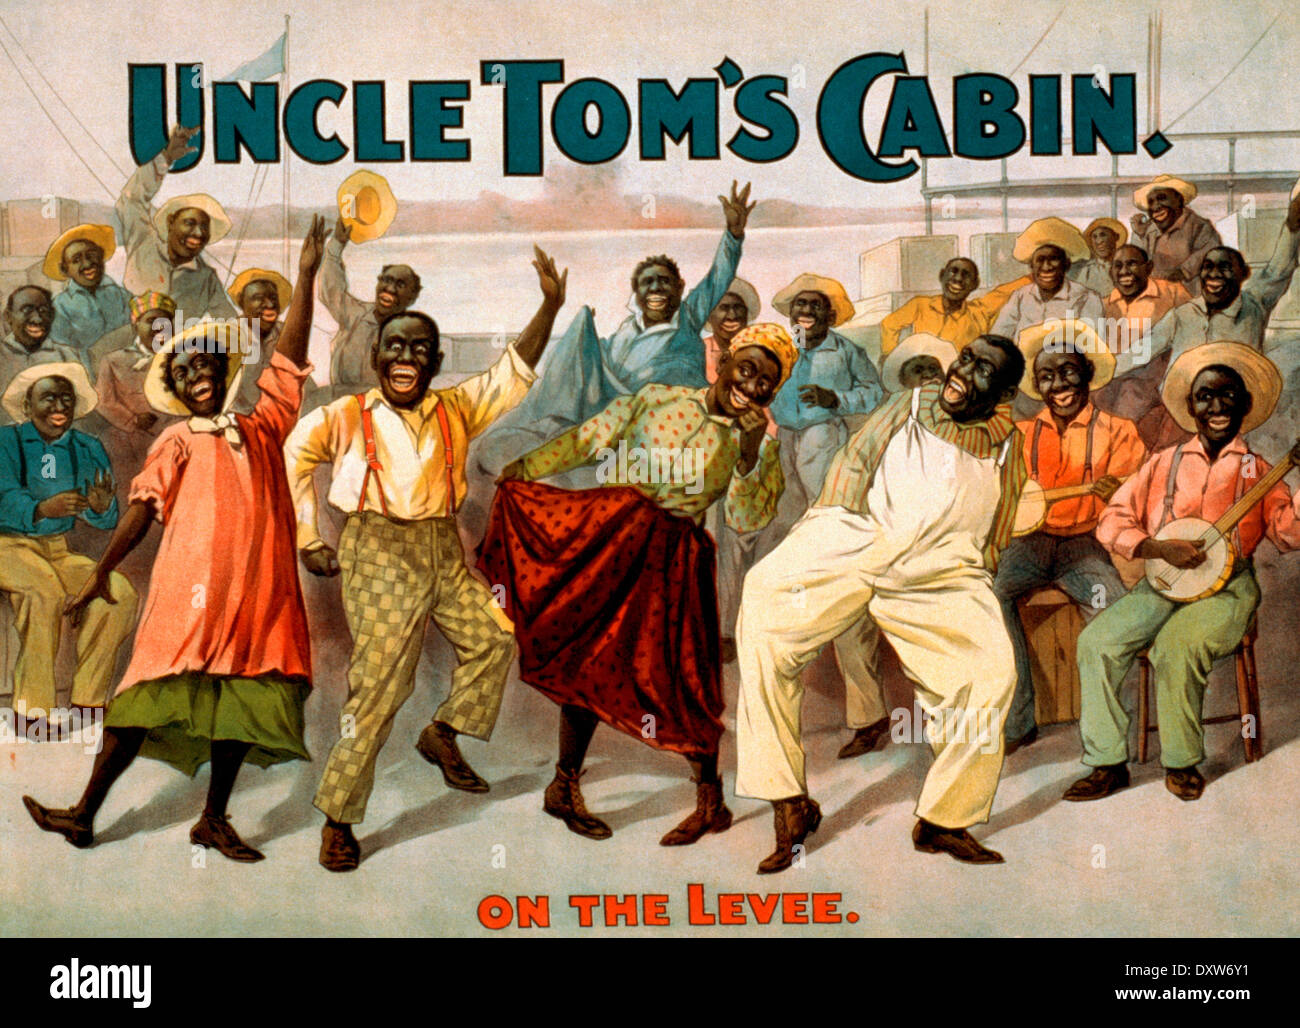 Uncle Tom's cabin, on the levee - Advertisement for play based on famous novel, circa 1899 Stock Photo